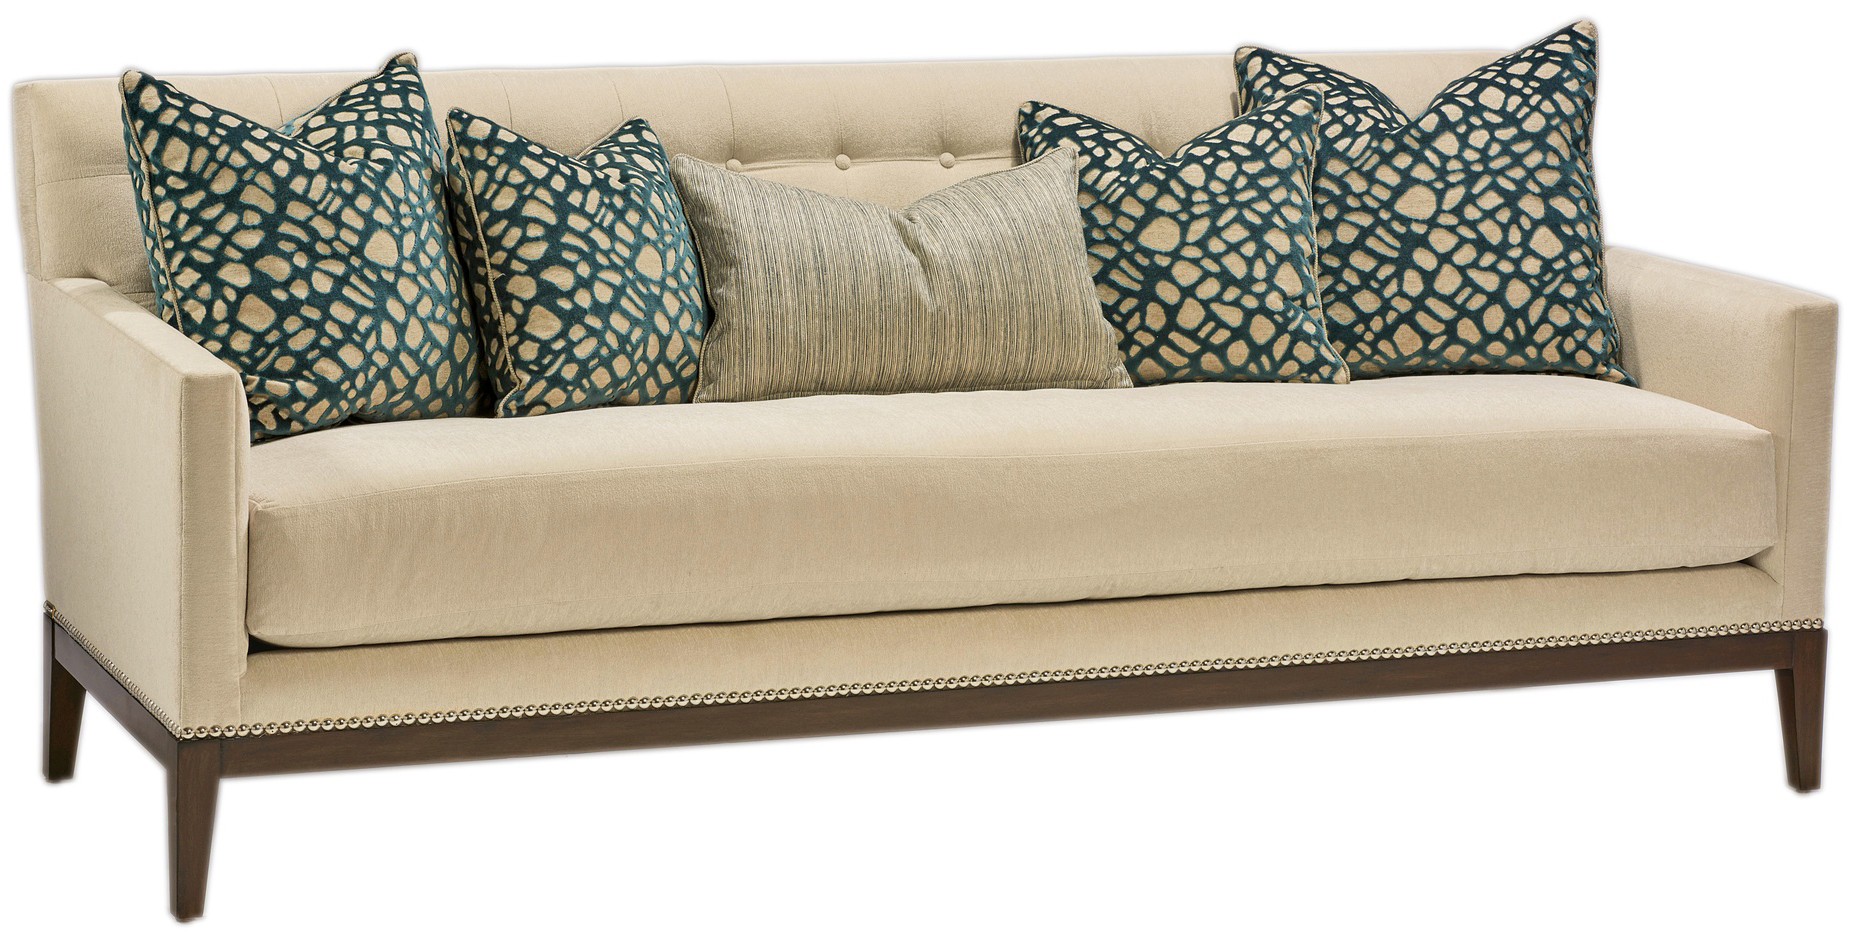 SOFA, COUCH & LOVESEAT Sofa 6075 from our modern Dakota collection